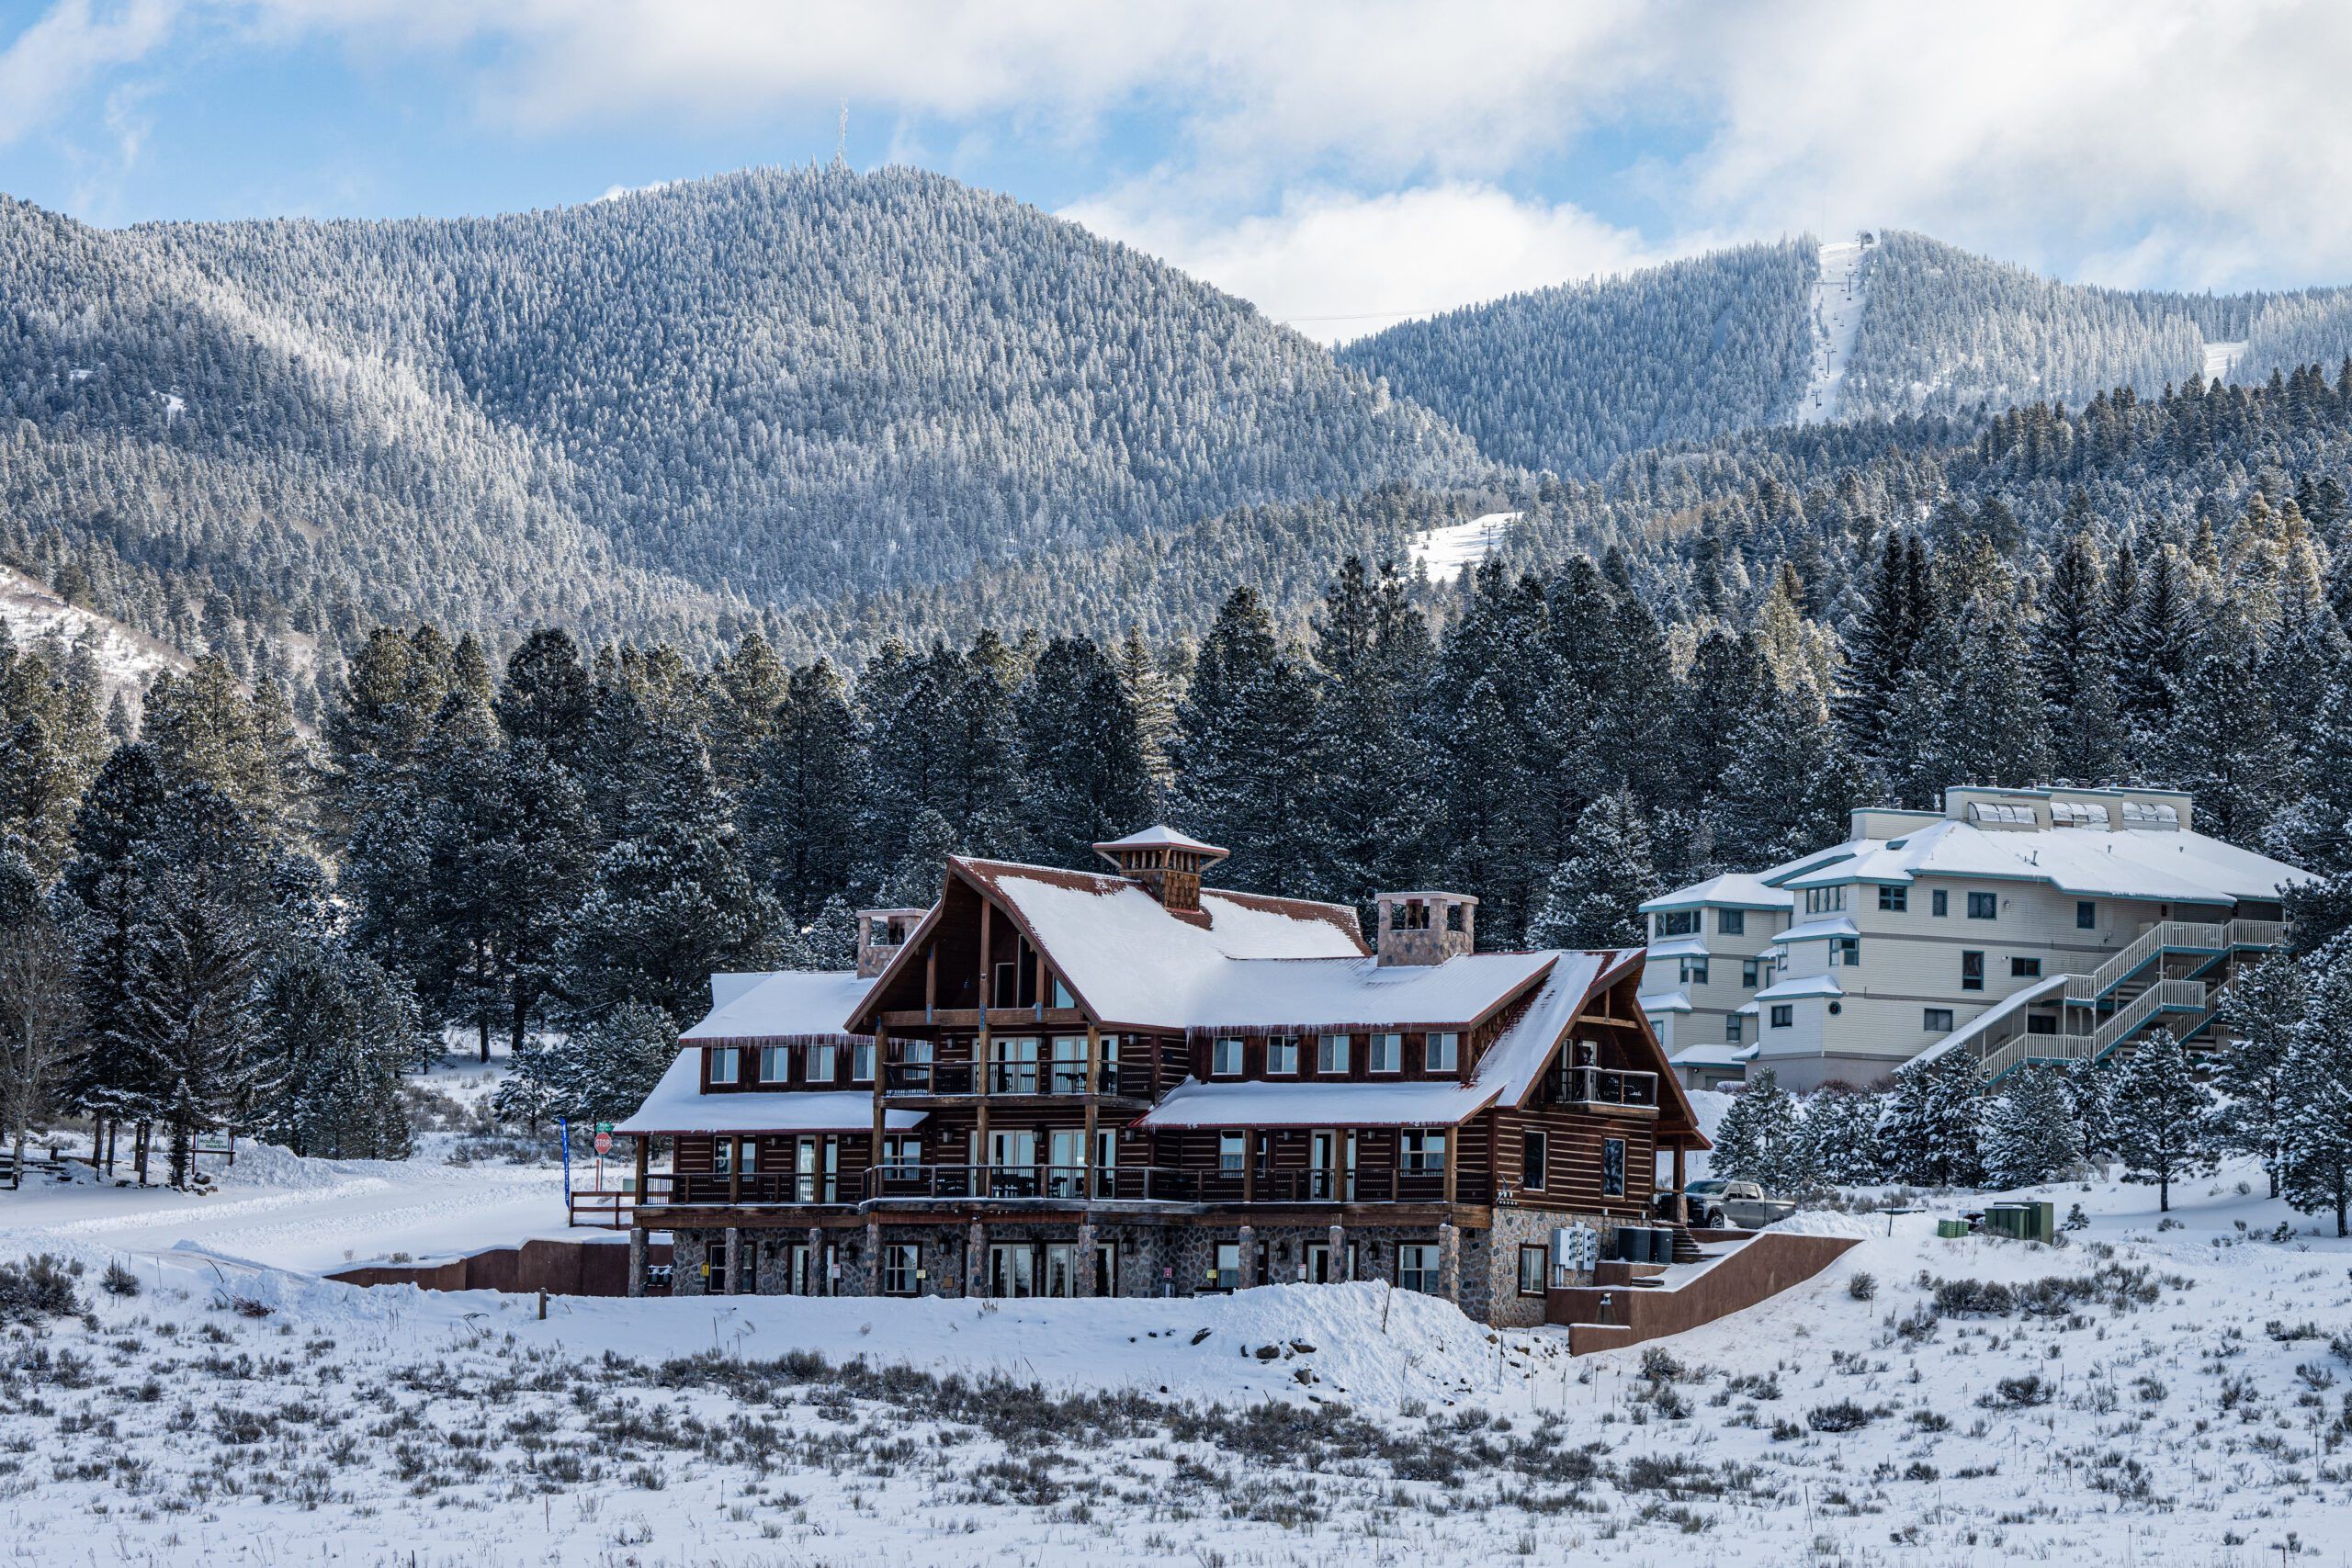 Wheeler Peak Lodge during the winter in Angel Fire, New Mexico.